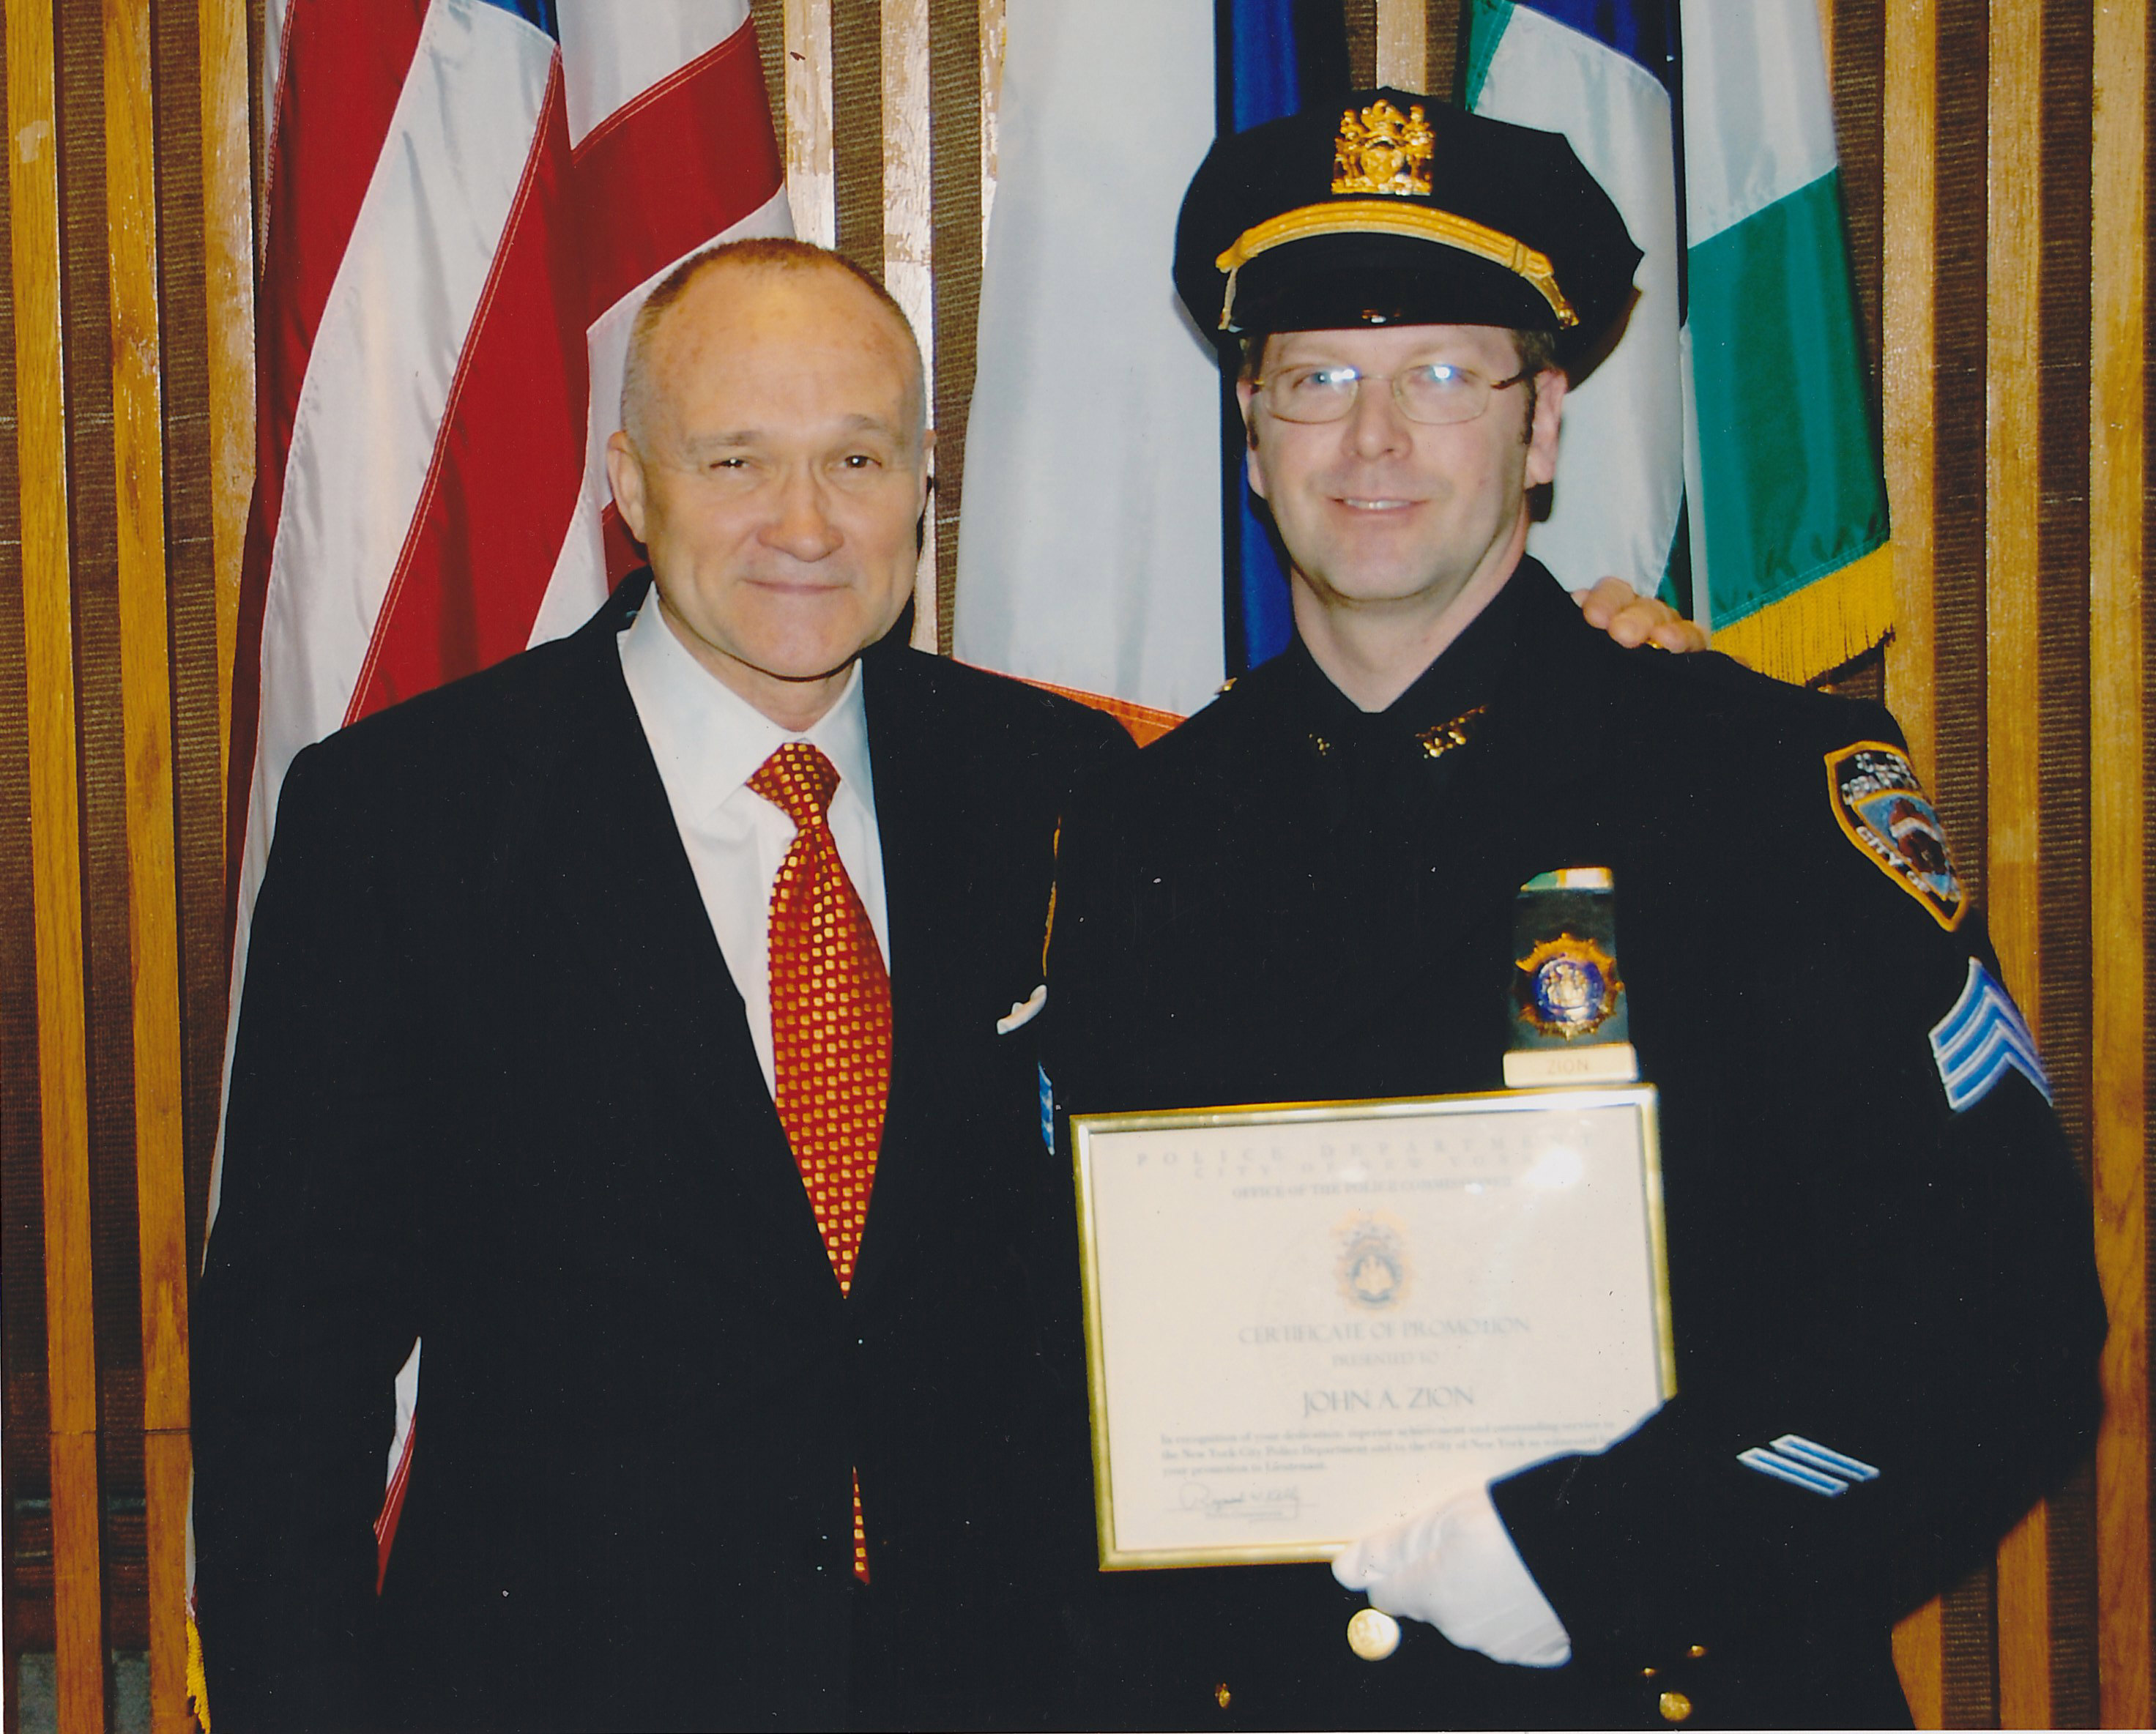 At the Promotional Ceremony with NYPD Police Commissioner Ray Kelley.